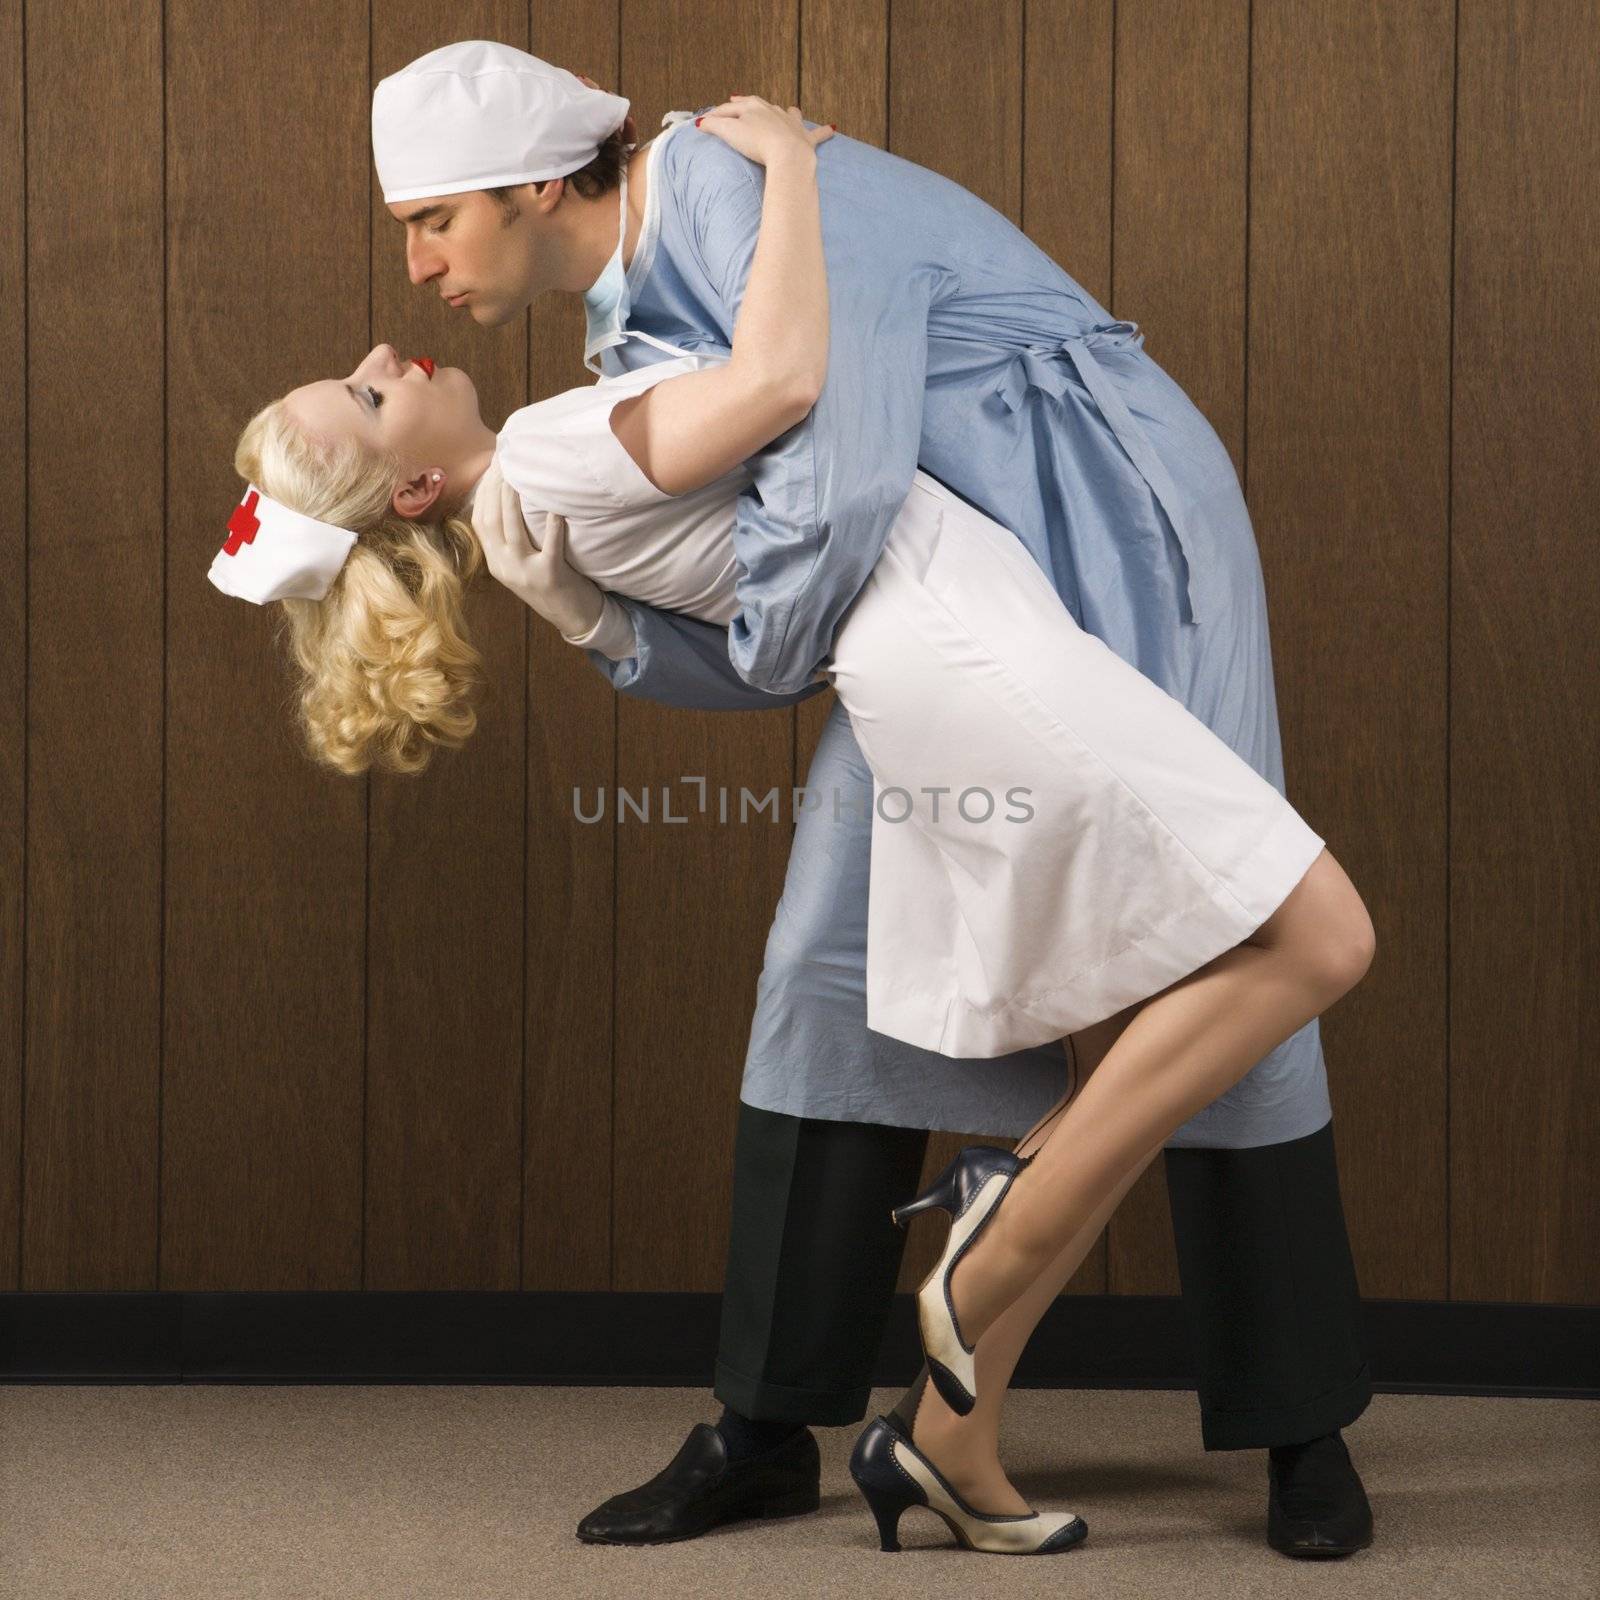 Mid-adult Caucasian male surgeon bending female nurse over backwards for passionate embrace.